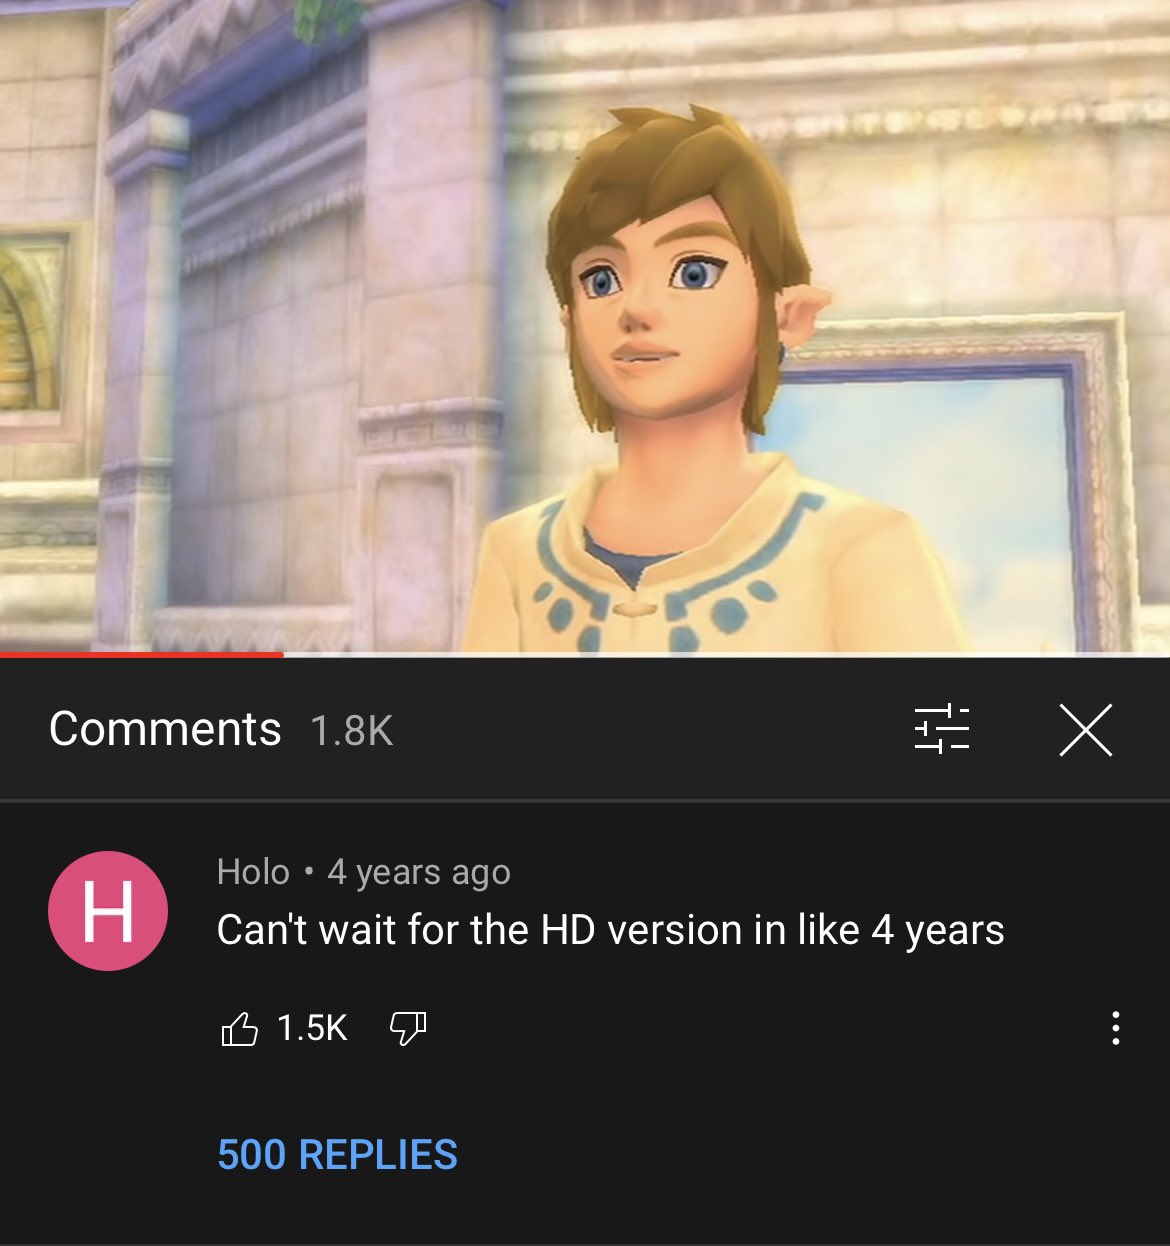 posts that aged well - skyward sword link - H Holo 4 years ago Can't wait for the Hd version in 4 years # X 500 Replies